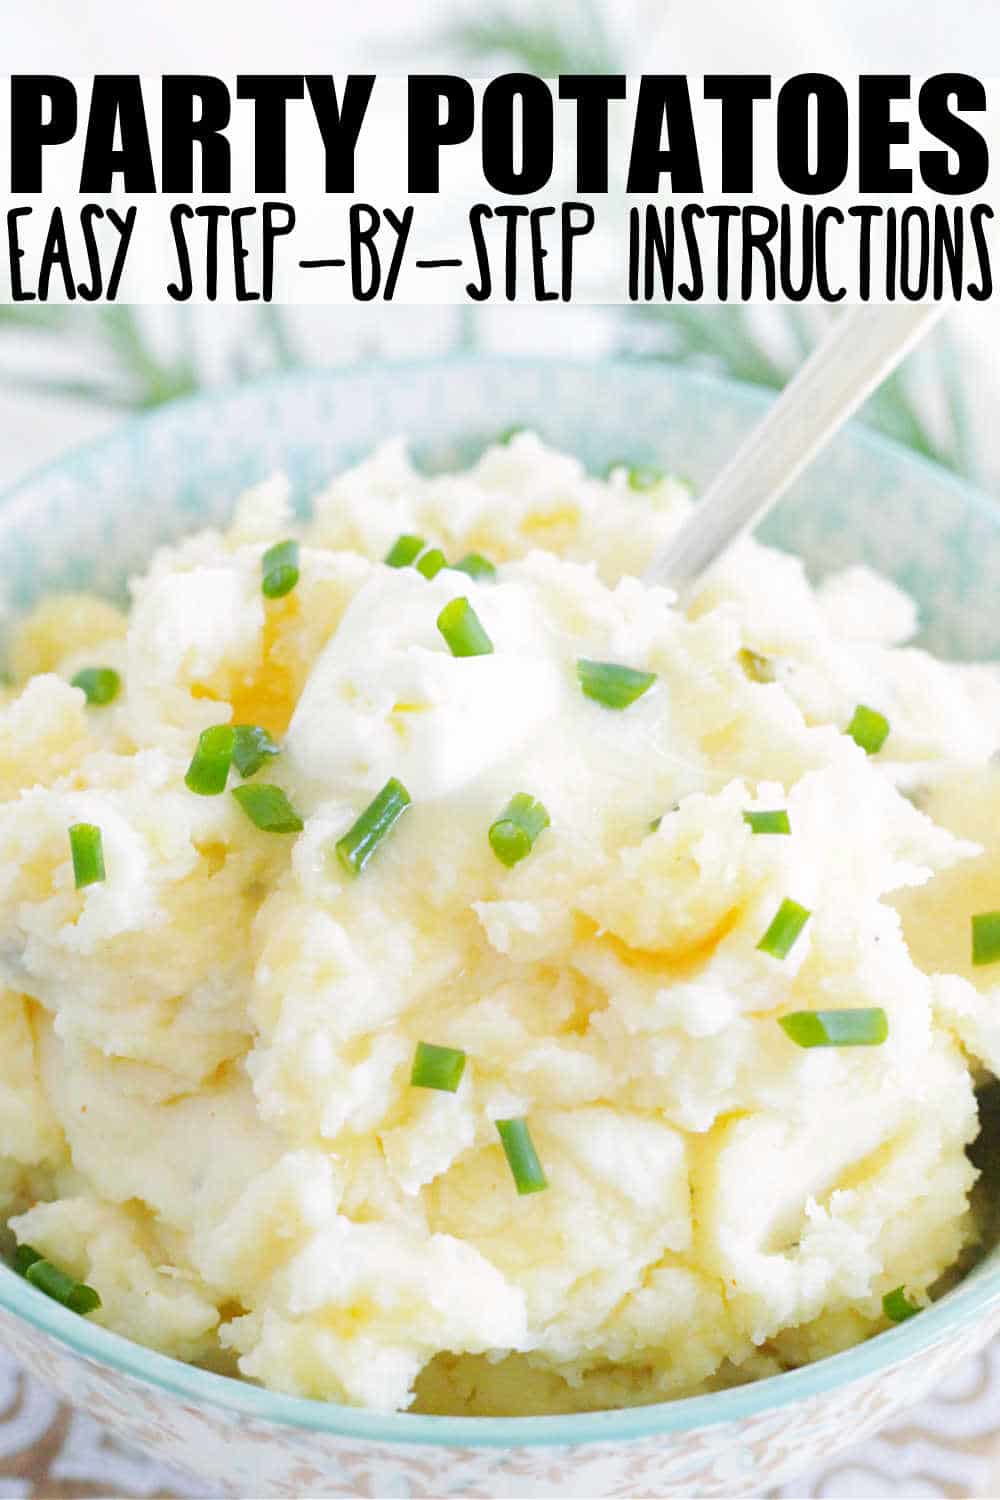 Party Potatoes are the ultimate make-ahead potatoes for holiday entertaining! Creamy mashed potatoes baked in the oven when ready to serve via @foodtasticmom